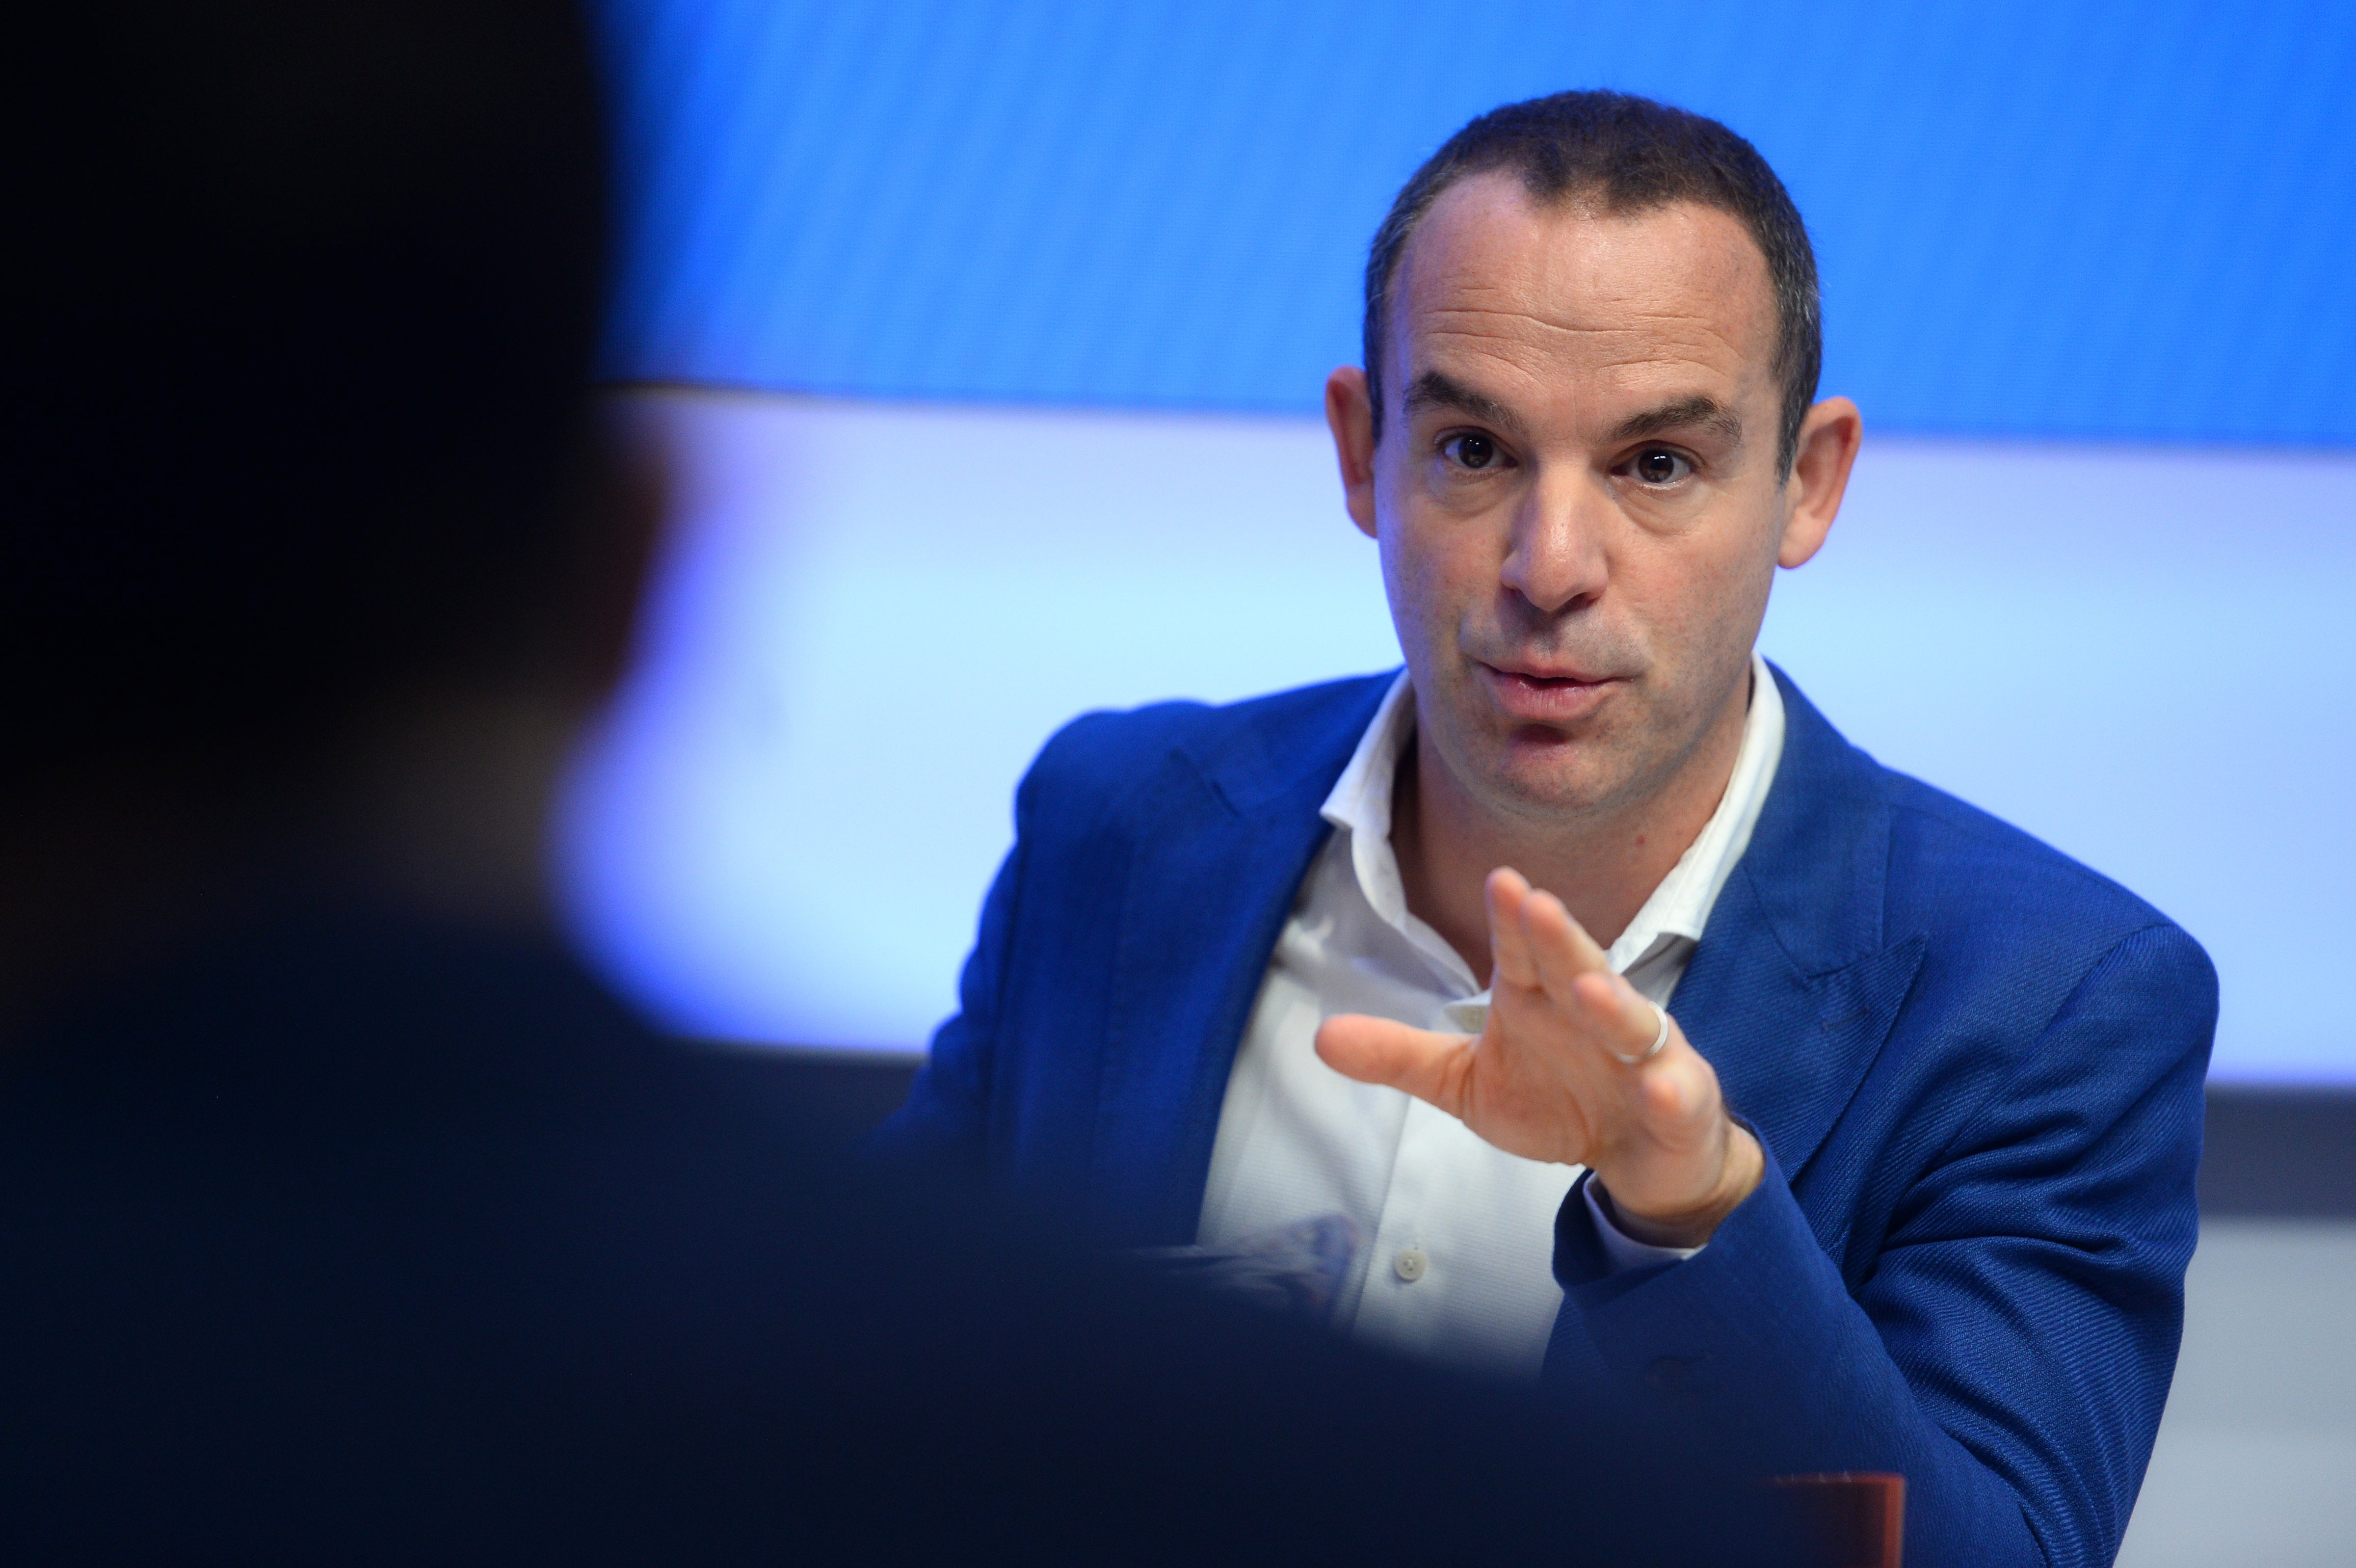 Money Saving Expert’s Martin Lewis said that wholesale prices spiked heavily last week (Kirsty O’Connor/PA)